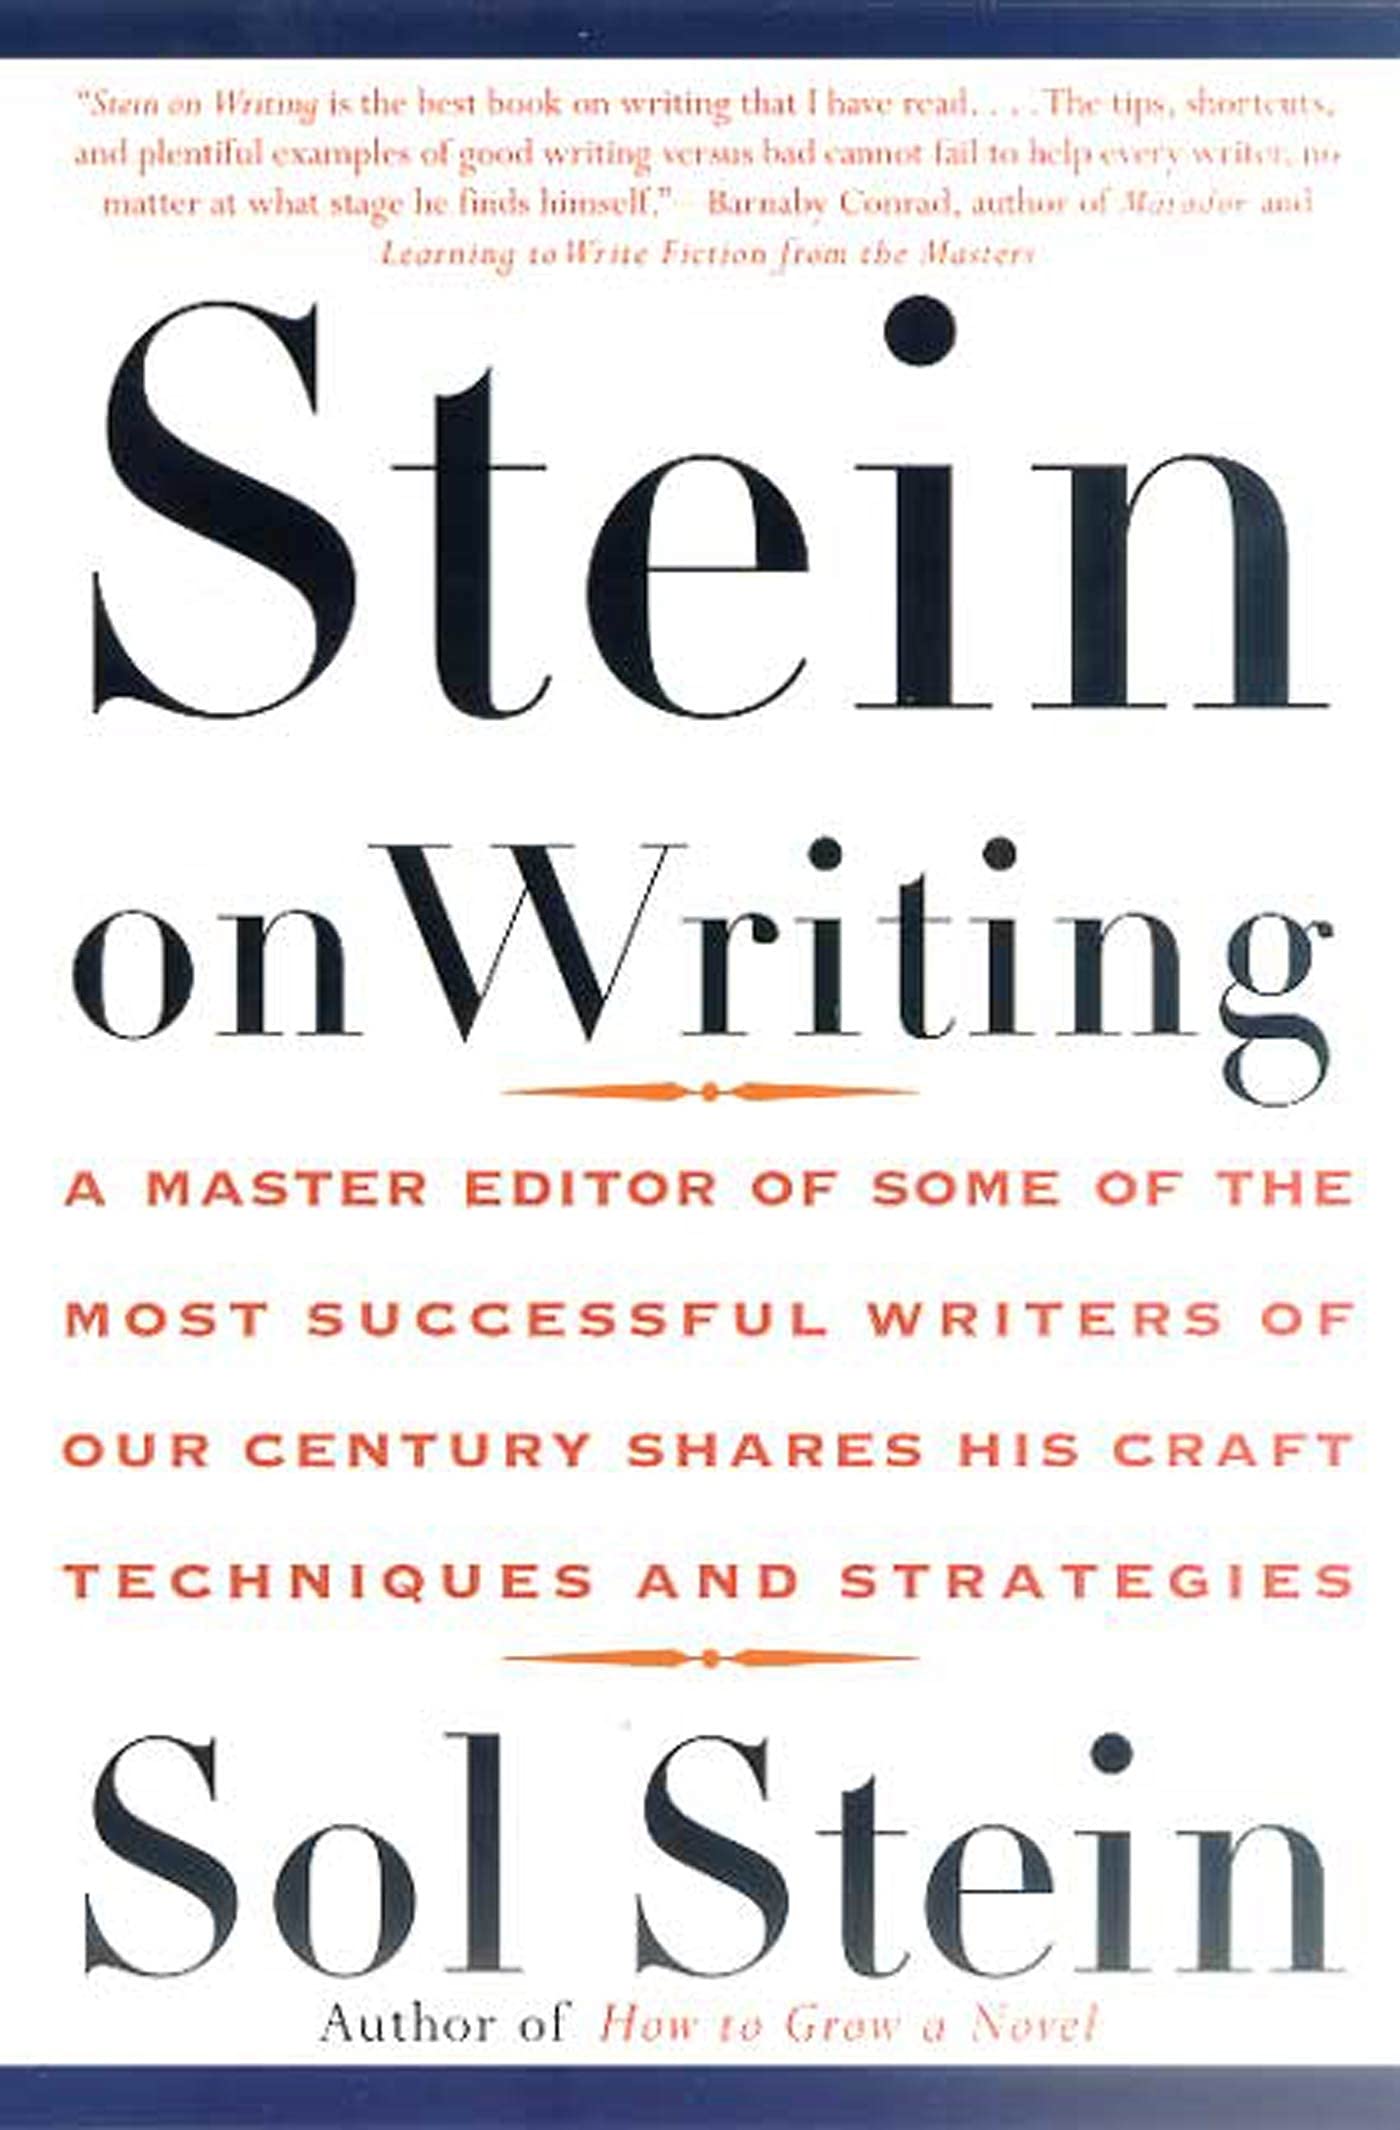 Book Cover Stein On Writing: A Master Editor of Some of the Most Successful Writers of Our Century Shares His Craft Techniques and Strategies